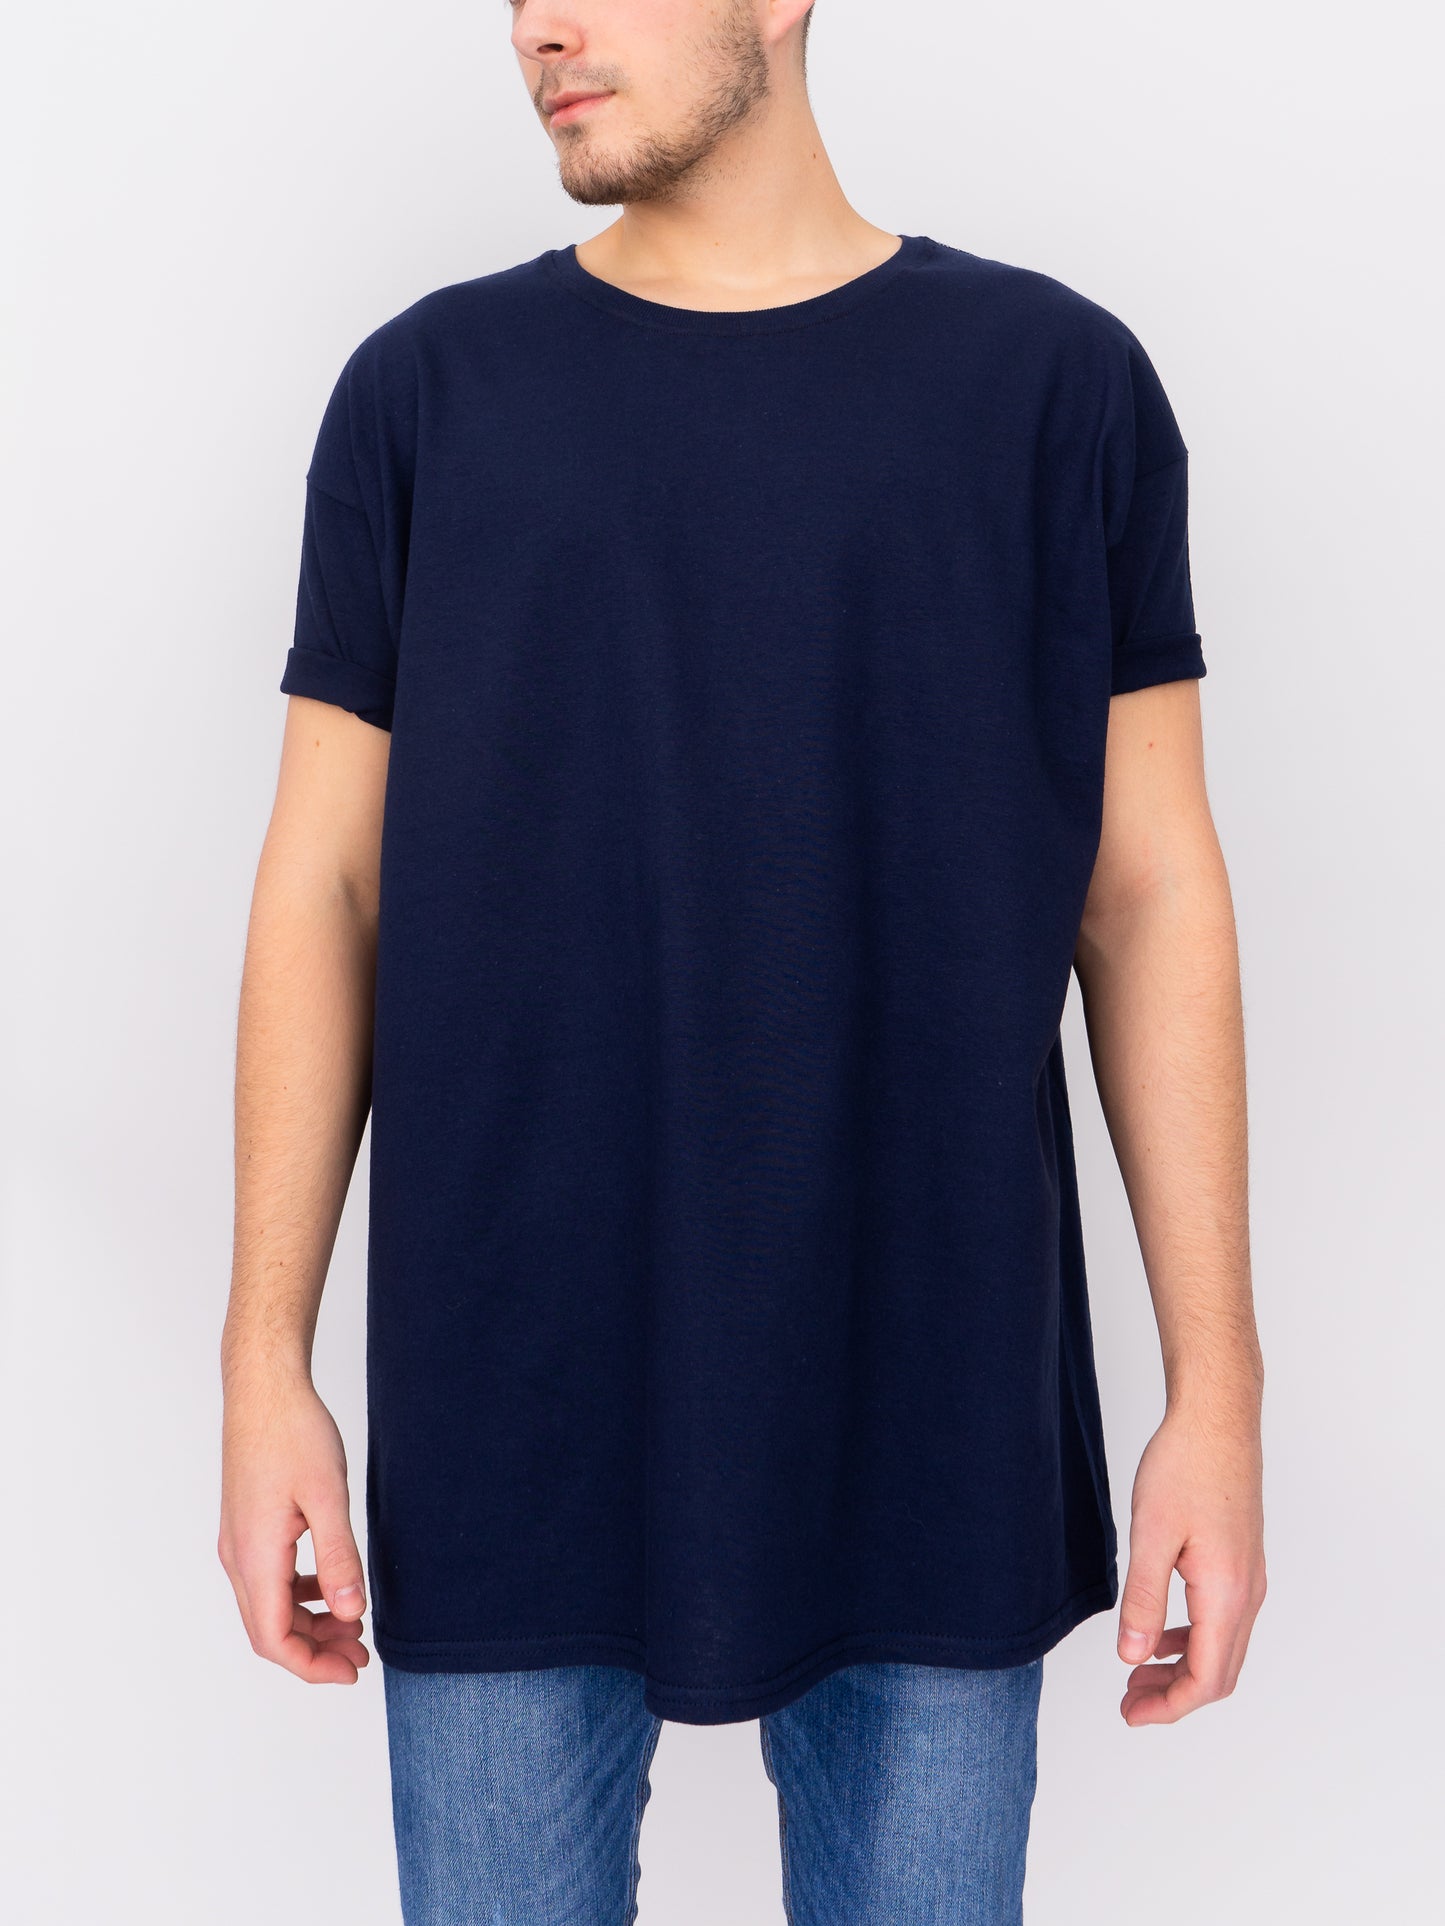 Blue - Clothing Oversize in T-Shirt Navy DEEP